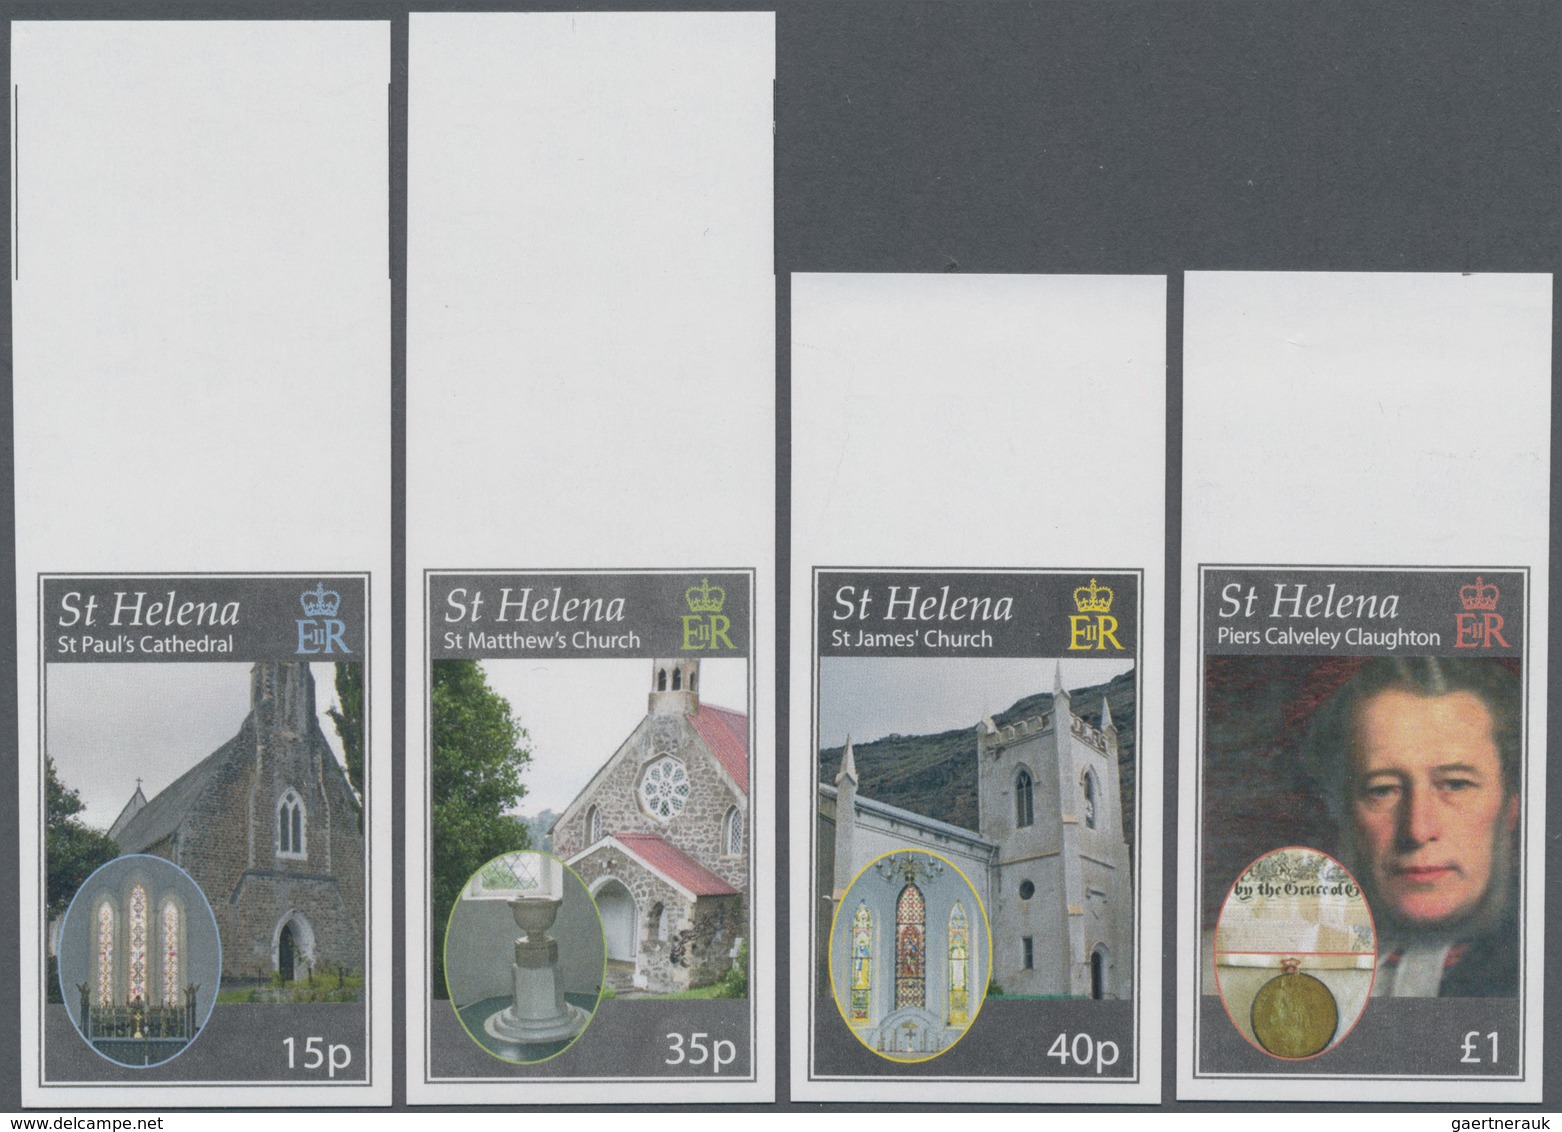 St. Helena: 2009, 150 Years Church Of England At St. Helena Complete IMPERFORATE Set Of Four From Up - St. Helena